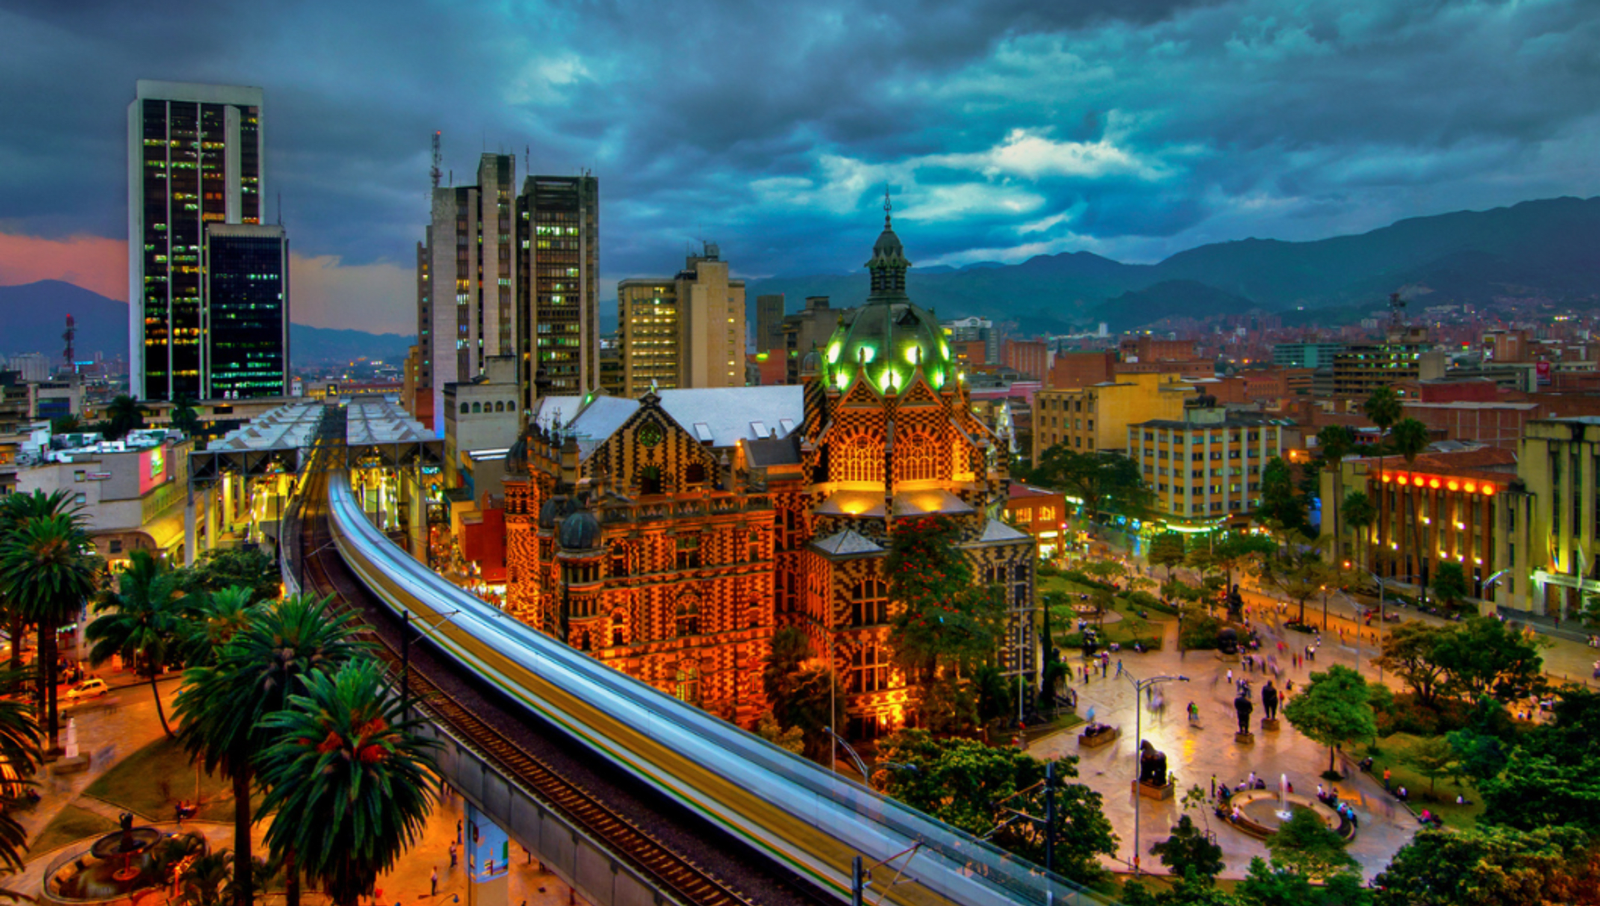 Train on tracks above the city going through medellin colombia at night